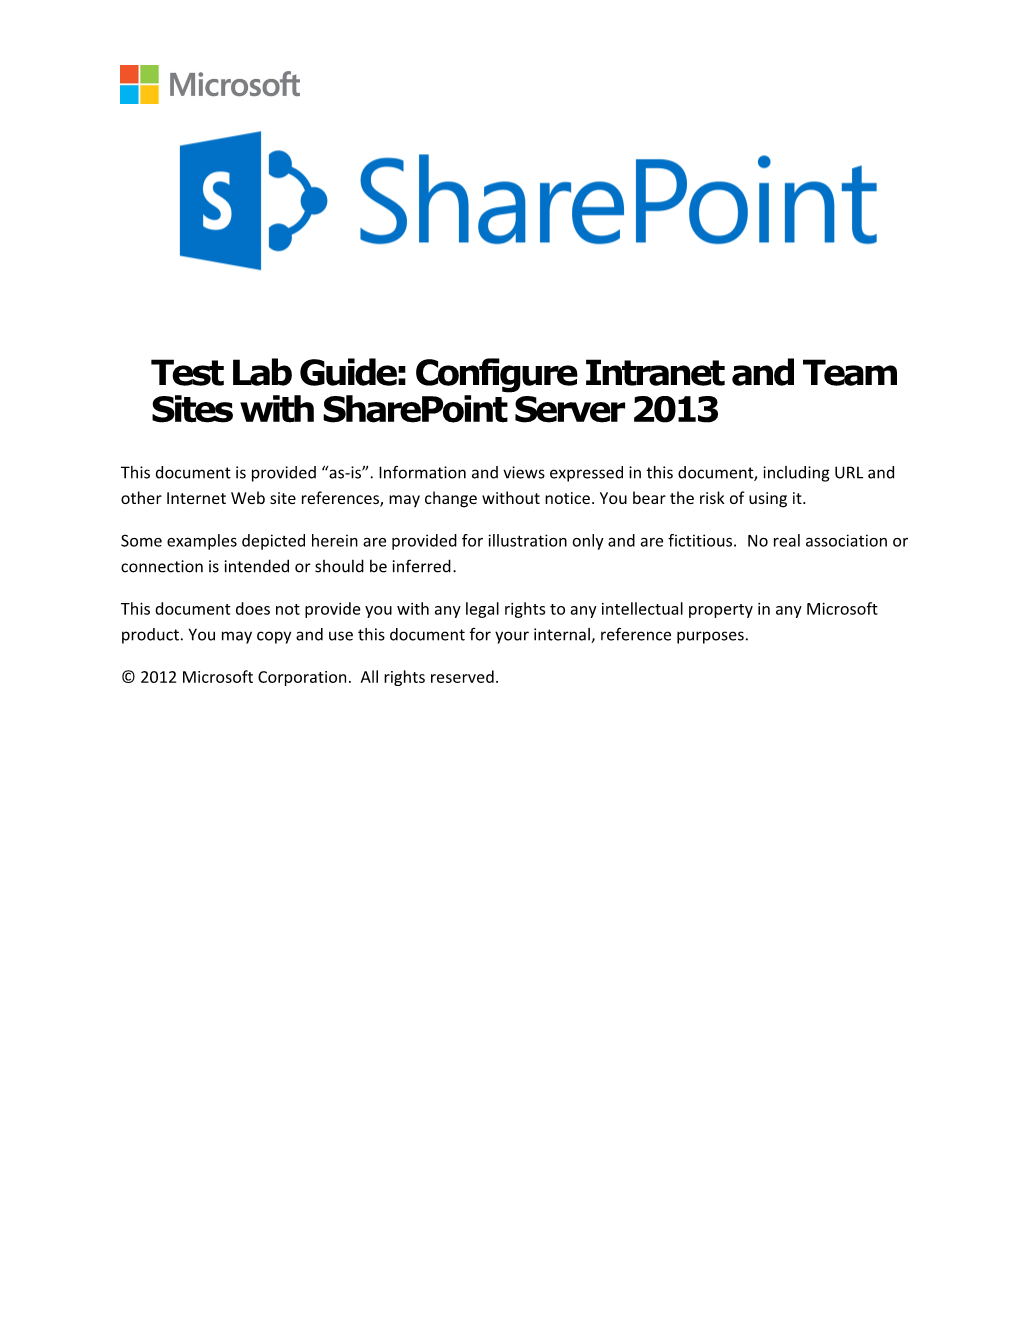 Test Lab Guide: Configure Intranet and Team Sites with Sharepoint Server 2013